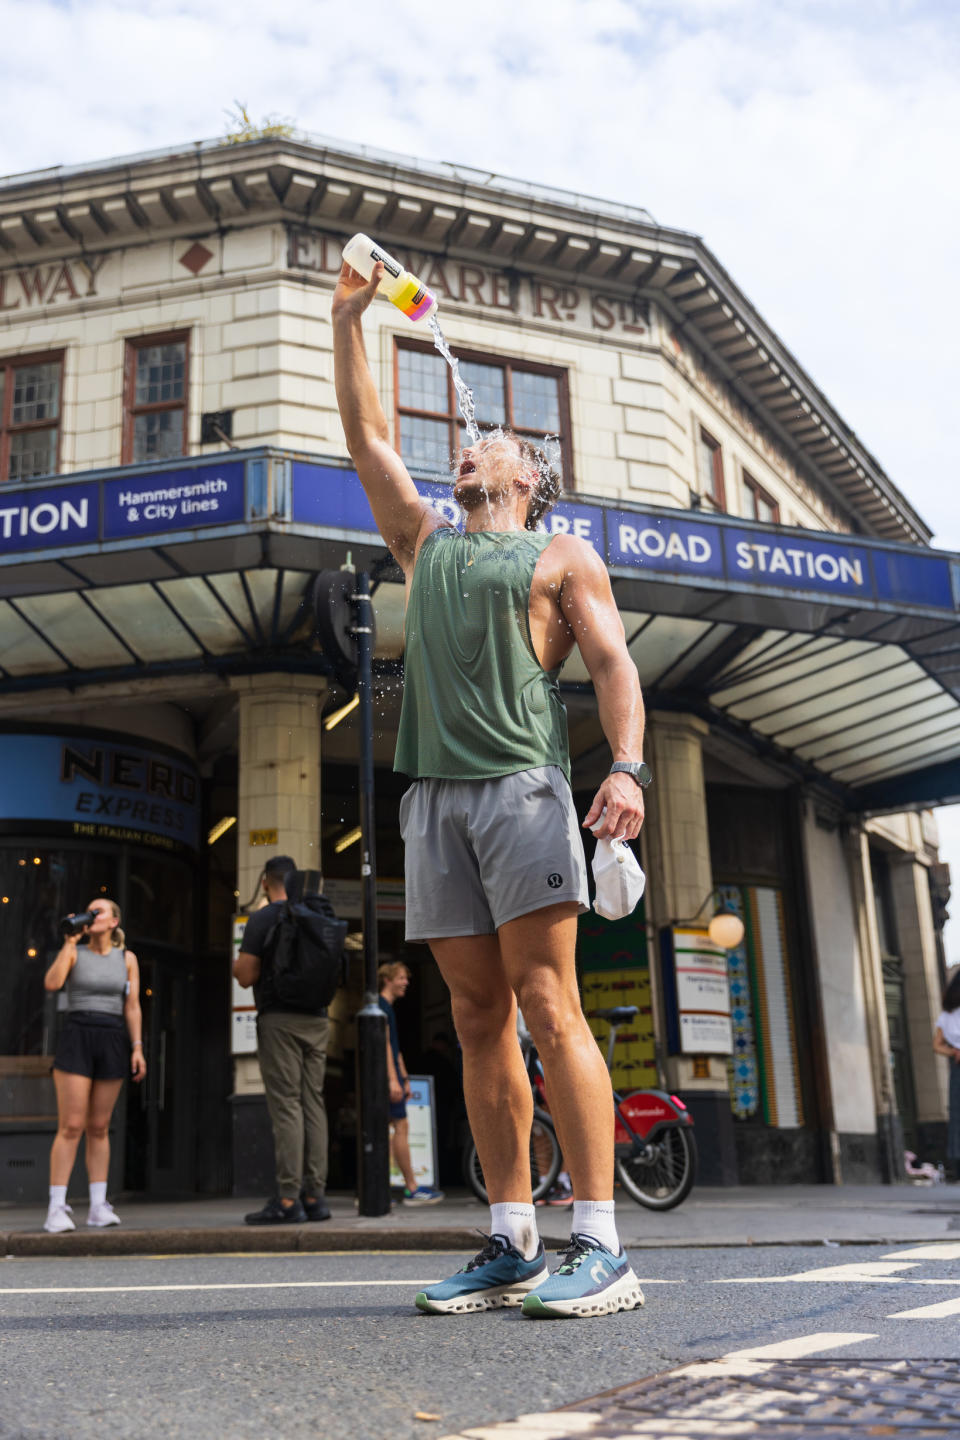 Jonny will be finishing his challenge in London (Mike Waters/PA)